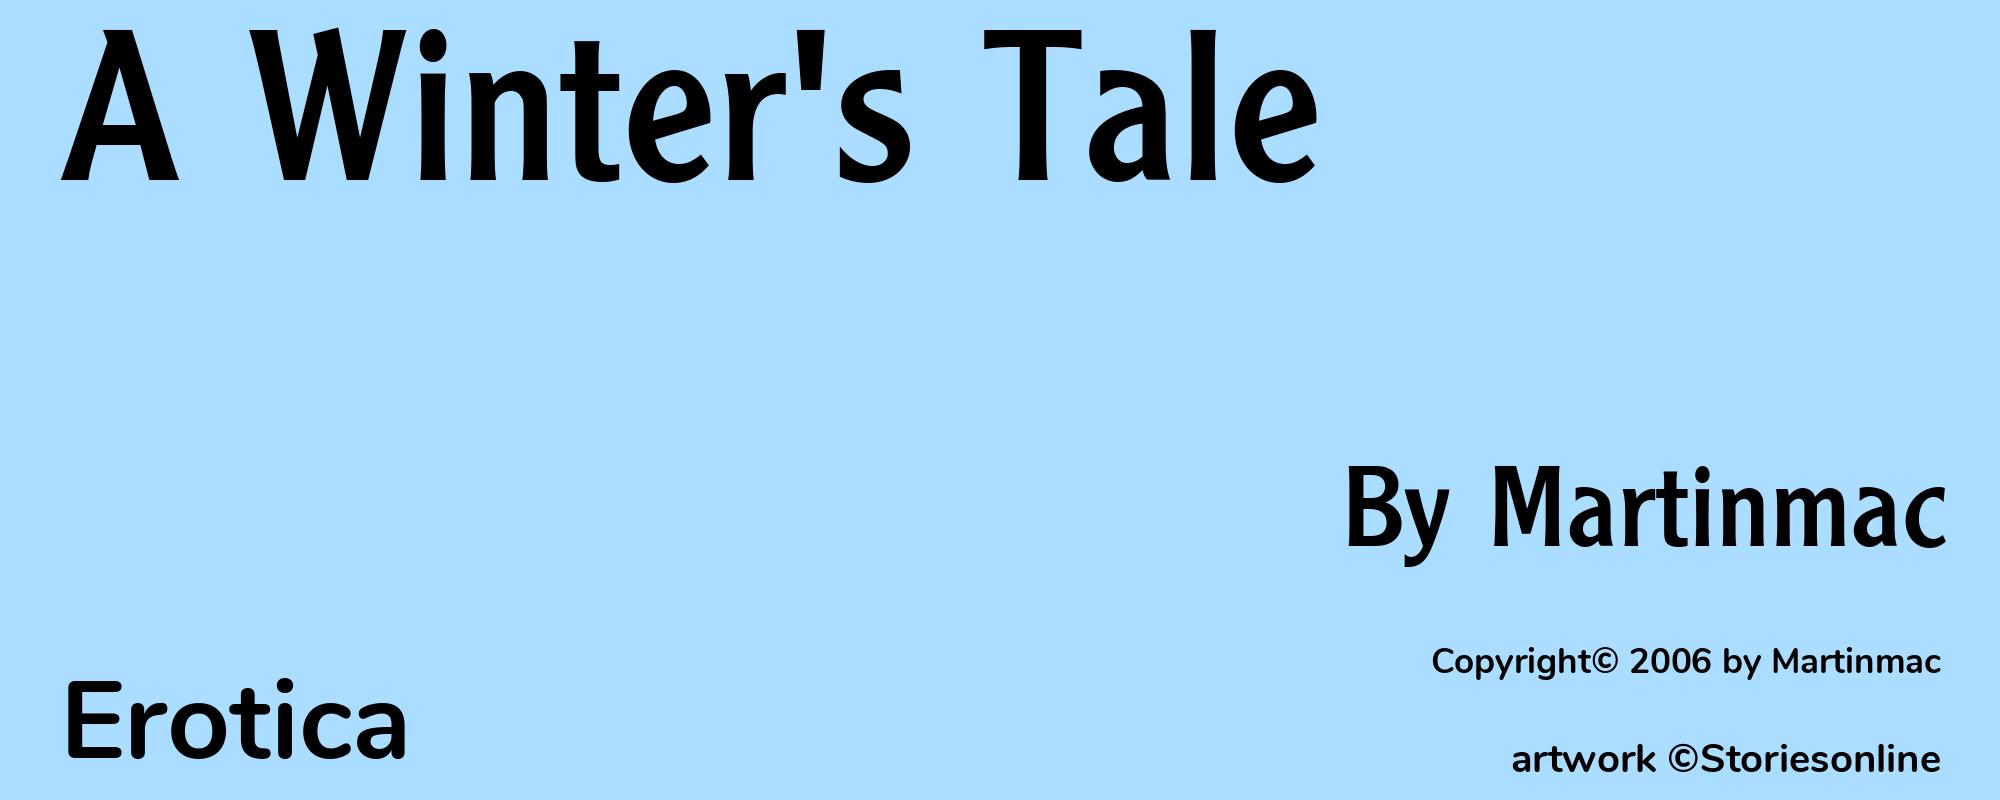 A Winter's Tale - Cover